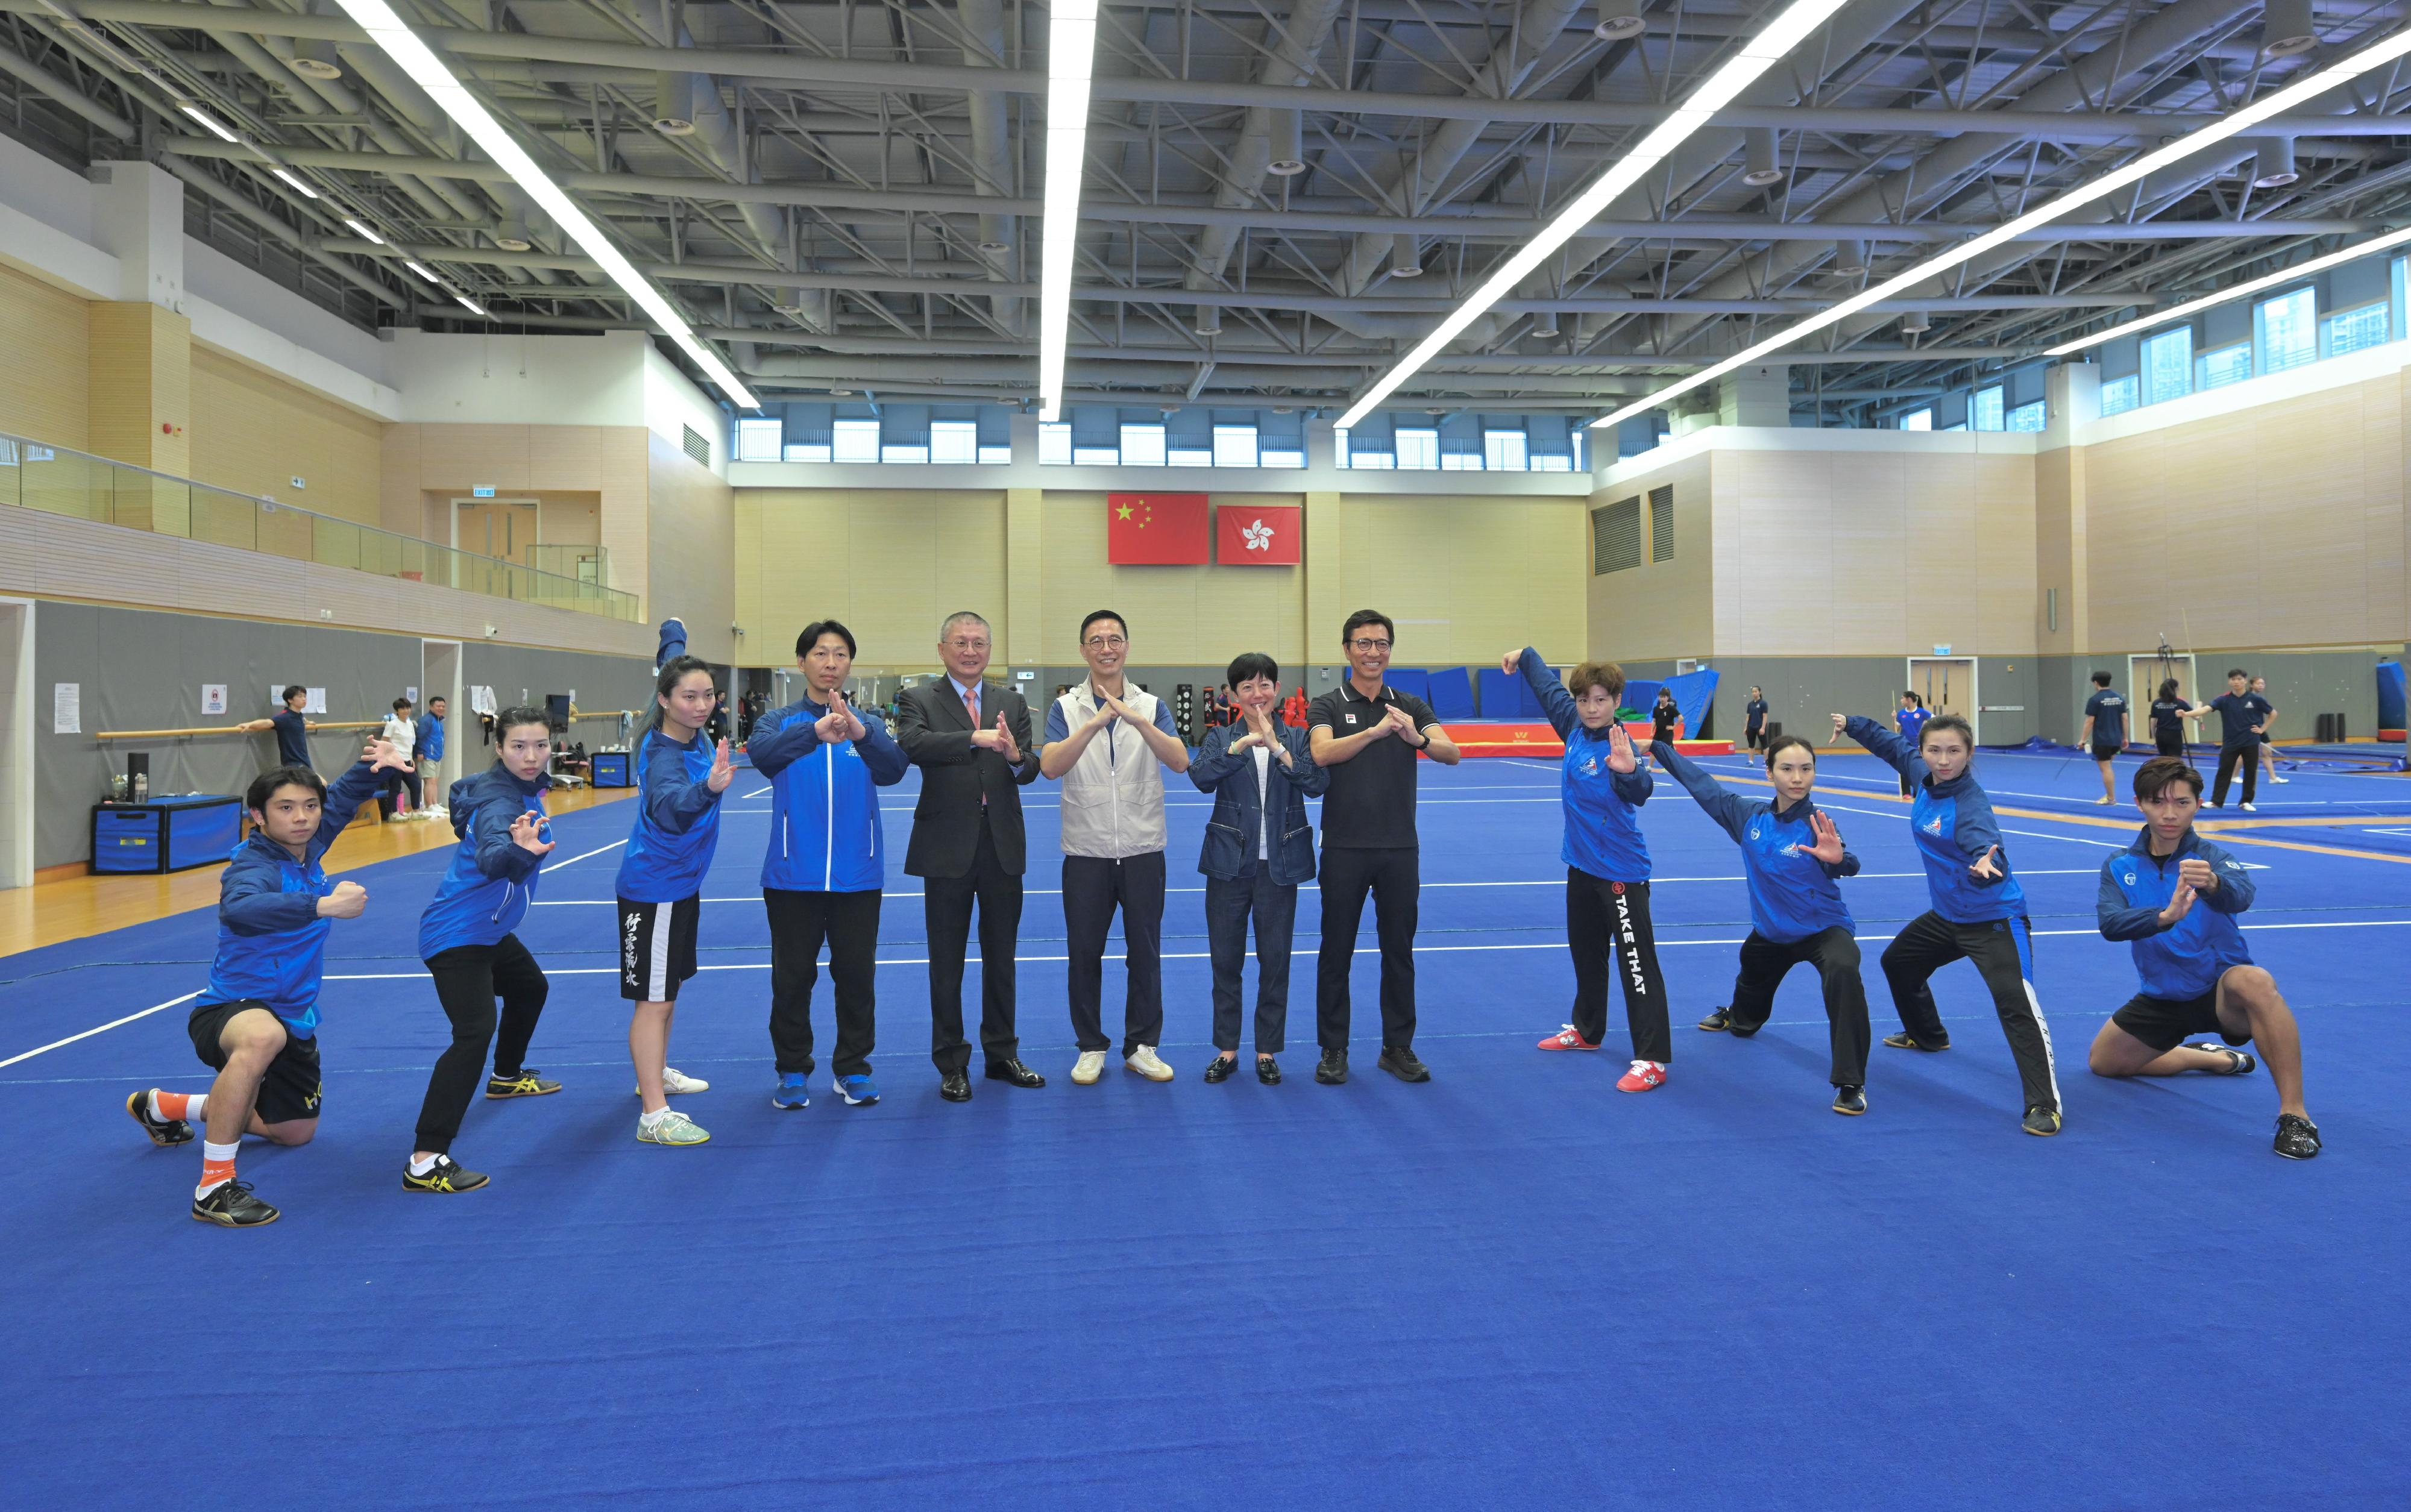 The Secretary for Culture, Sports and Tourism, Mr Kevin Yeung (sixth left), and the Commissioner for Sports, Mr Sam Wong (fifth right), this morning (September 14) visited the Wushu hall in the Hong Kong Sports Institute to express their best wishes to the athletes, hoping that they would give their best and bring glory to Hong Kong.